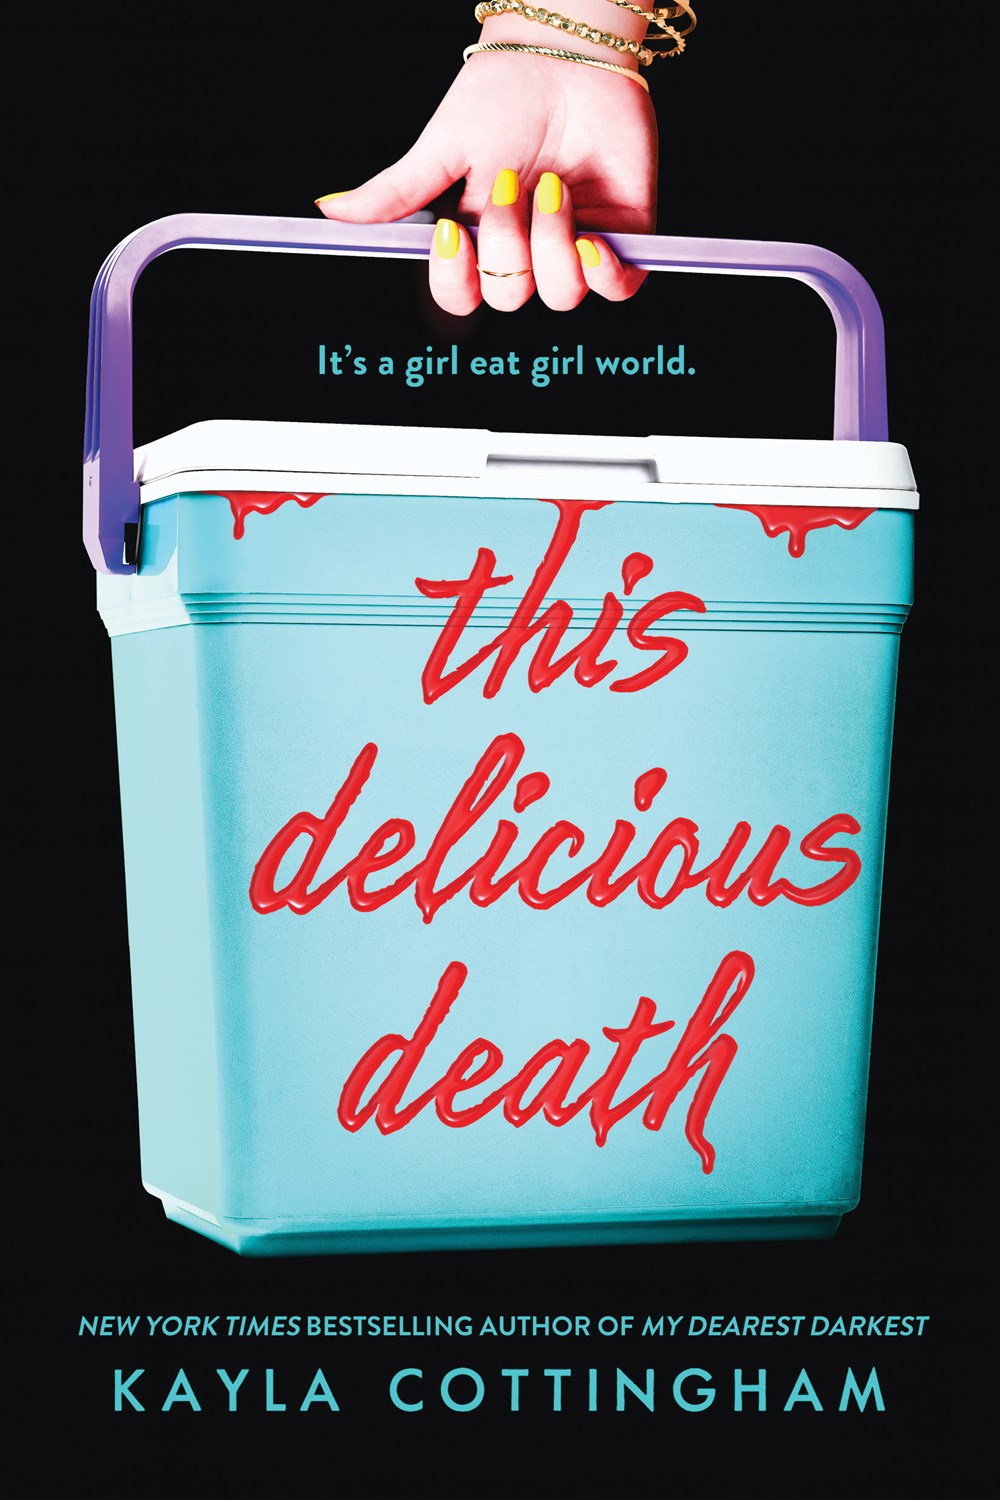 This Delicious Death by Kayla Cottingham